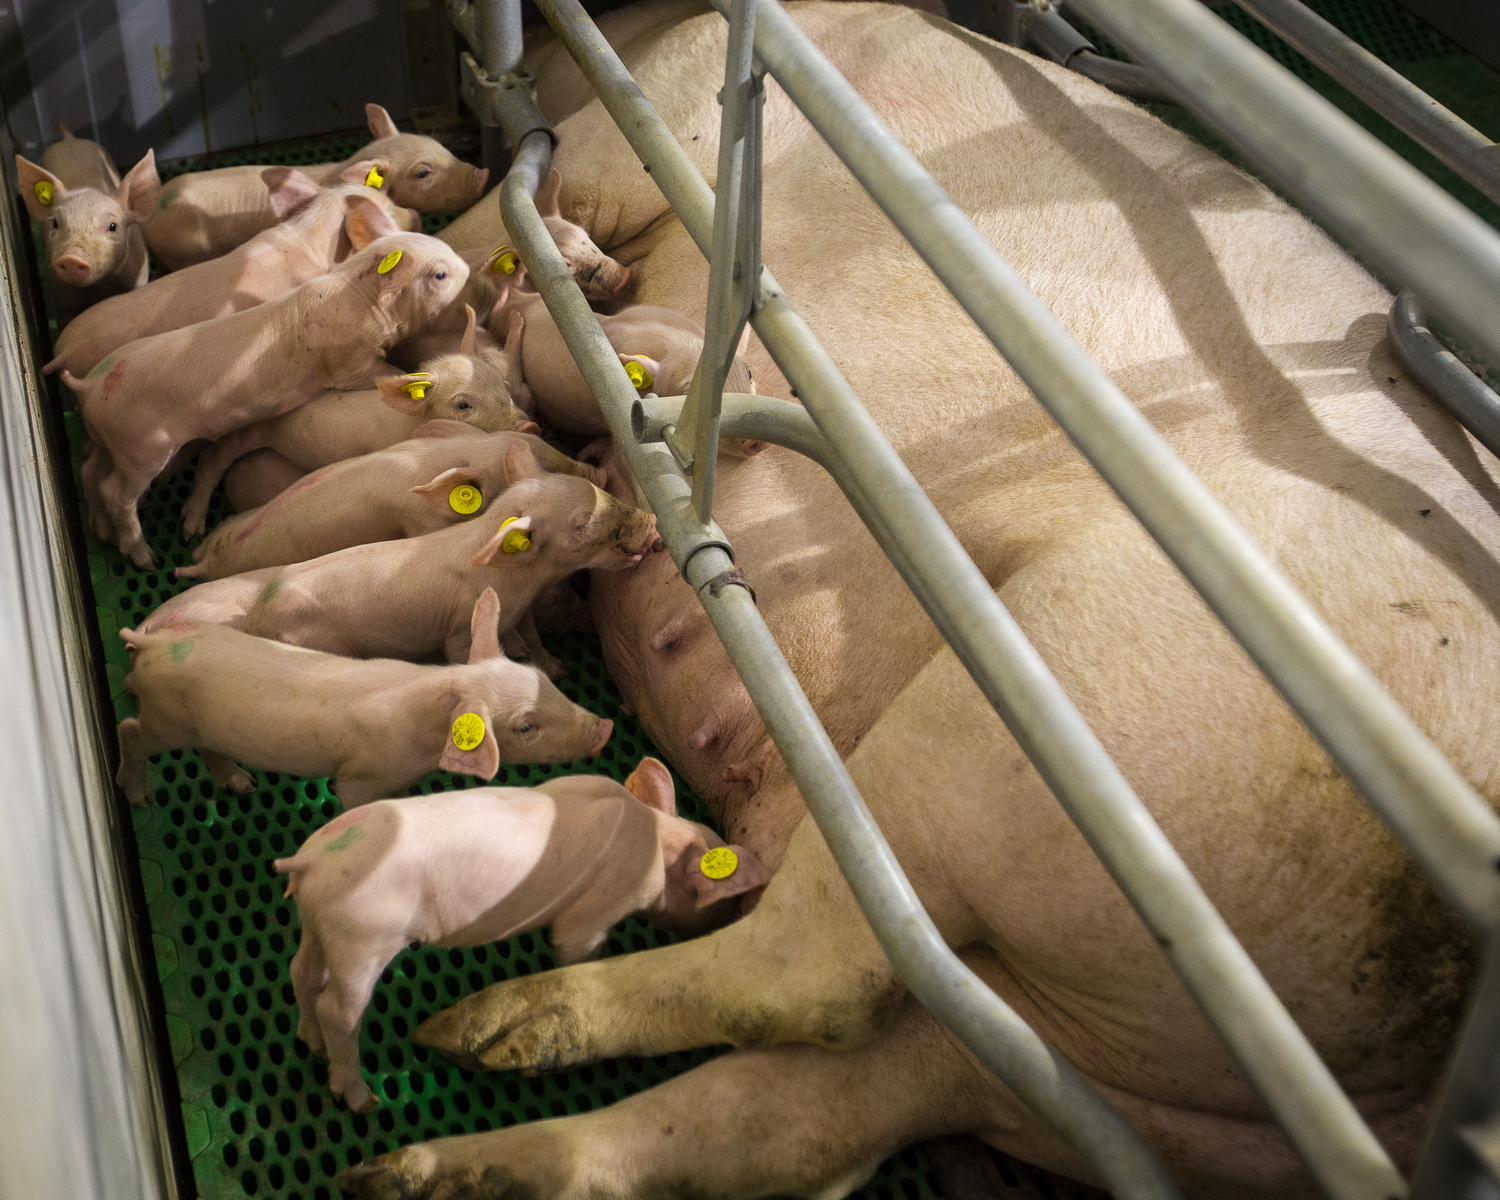 Increasing lactation feed intake may support sow longevity